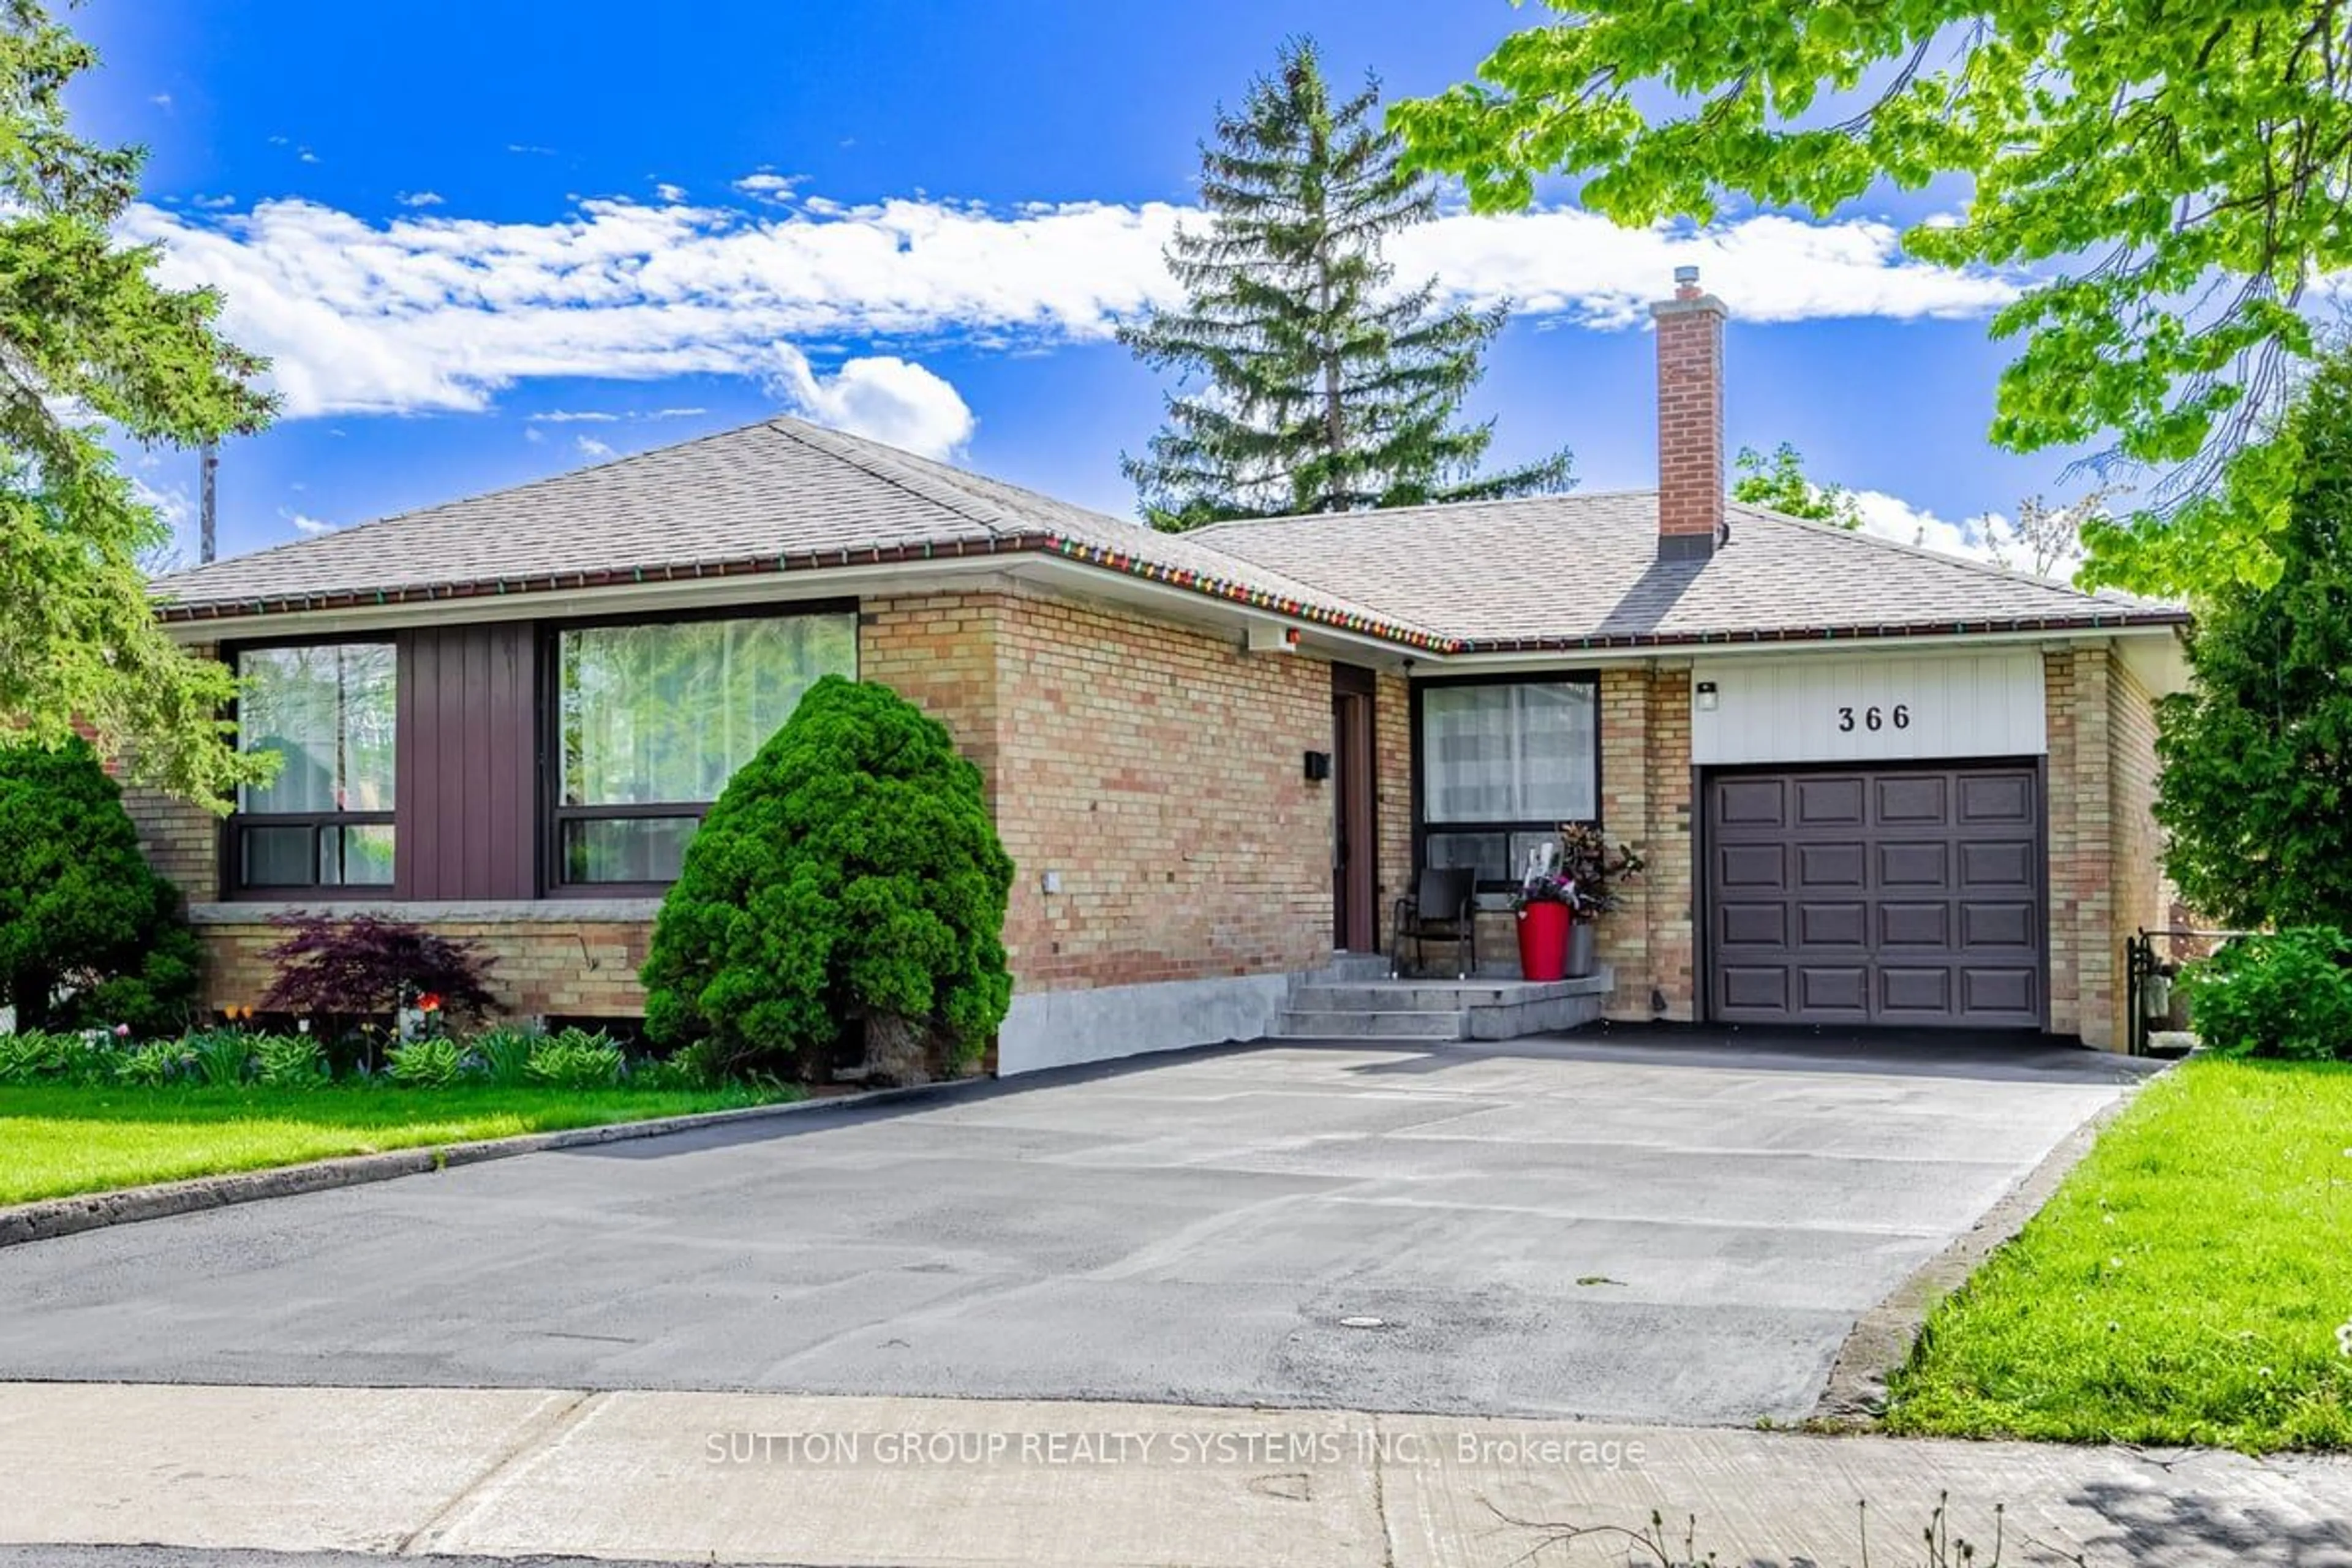 Home with brick exterior material for 366 Renforth Dr, Toronto Ontario M9C 2L9